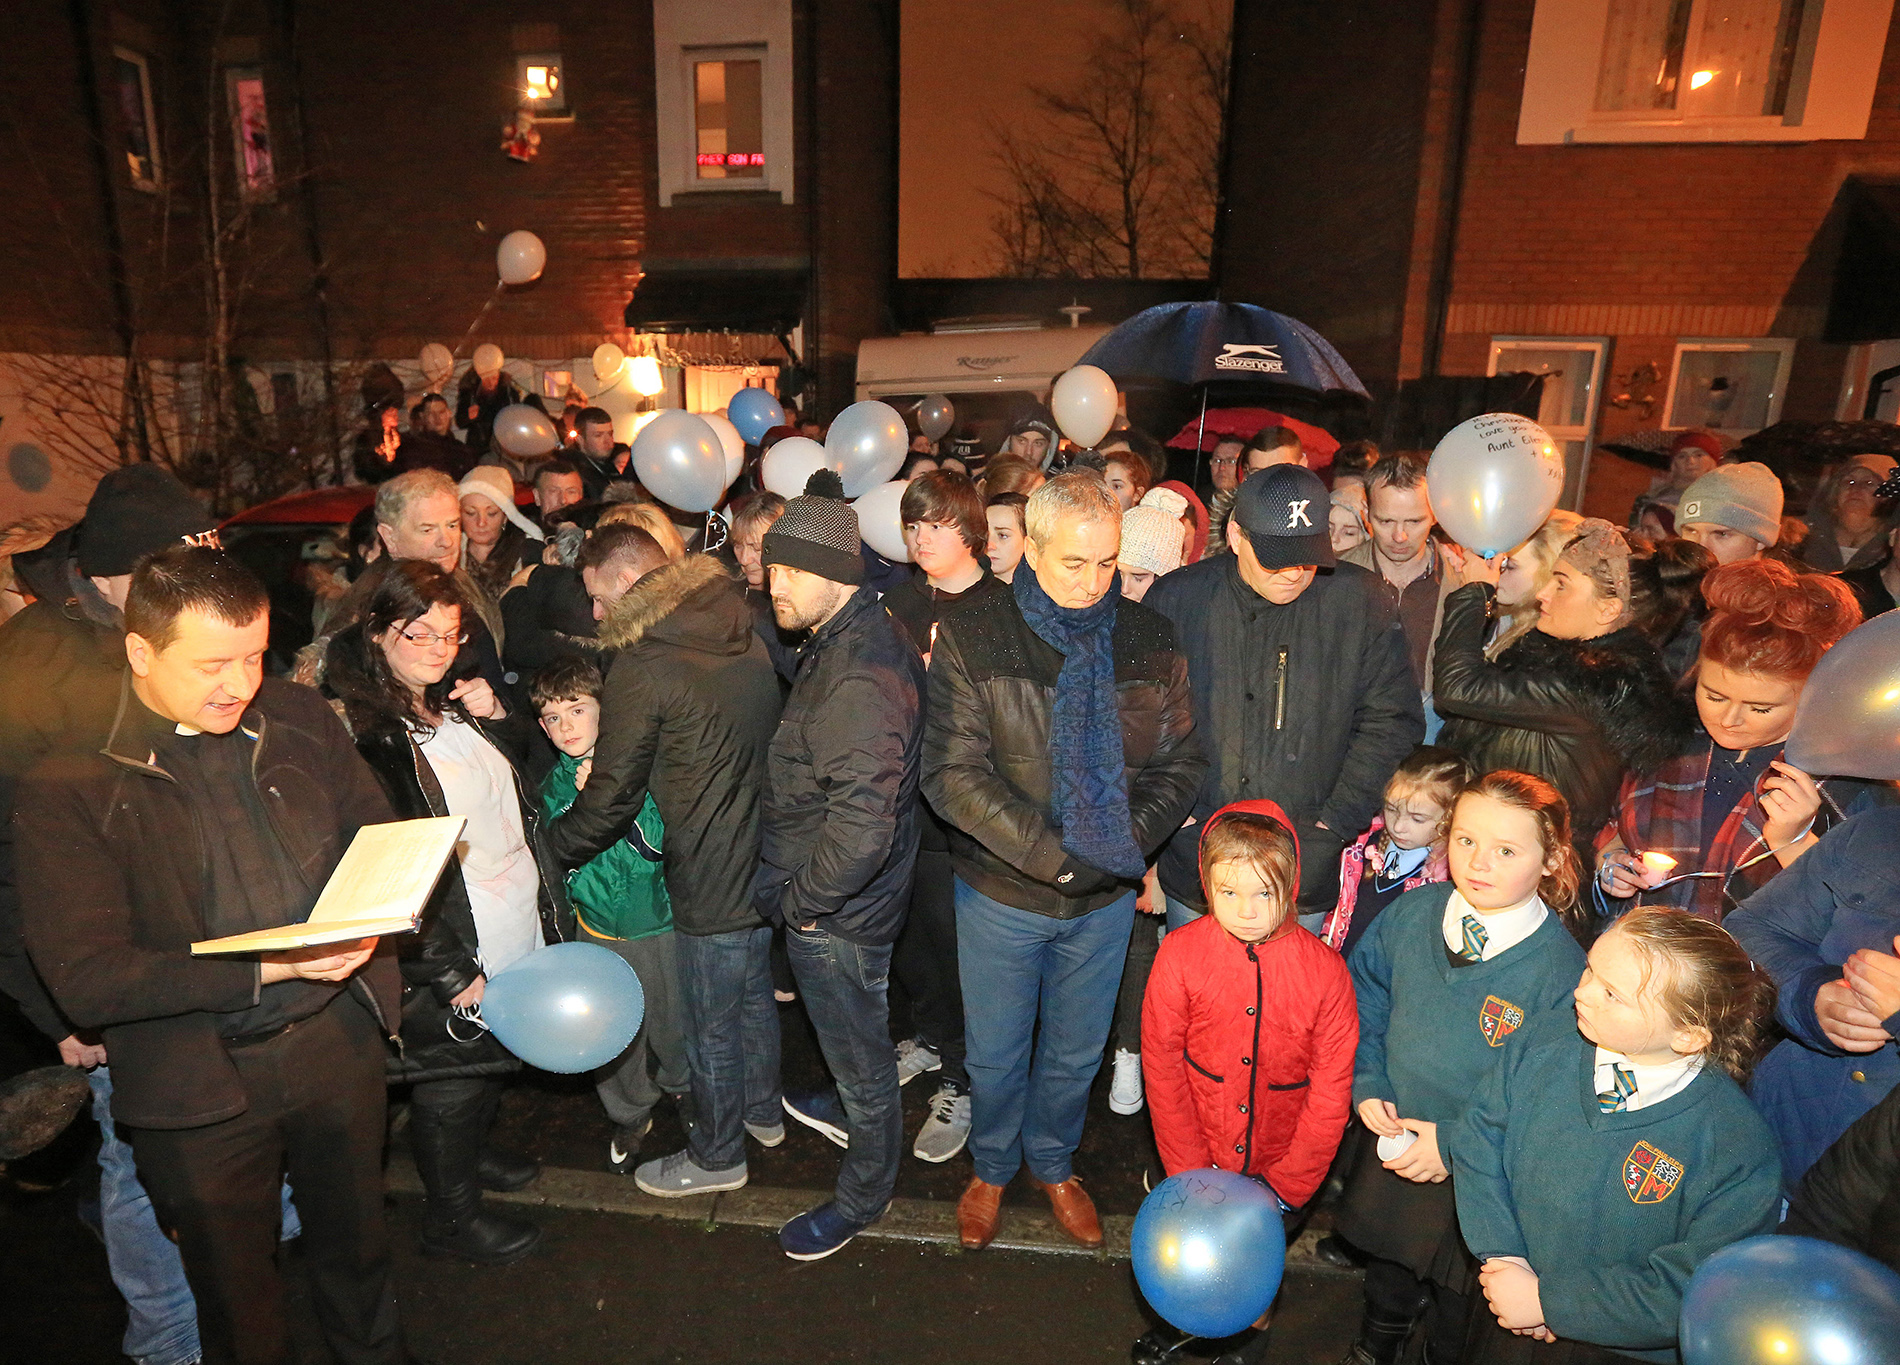 Father Darach Mac Giolla Catháin reads prayers at the vigil; on his left are Christopher\'s parents Chris Meli and Vanessa Burke with one of their younger sons    \nPic by Jim Corr